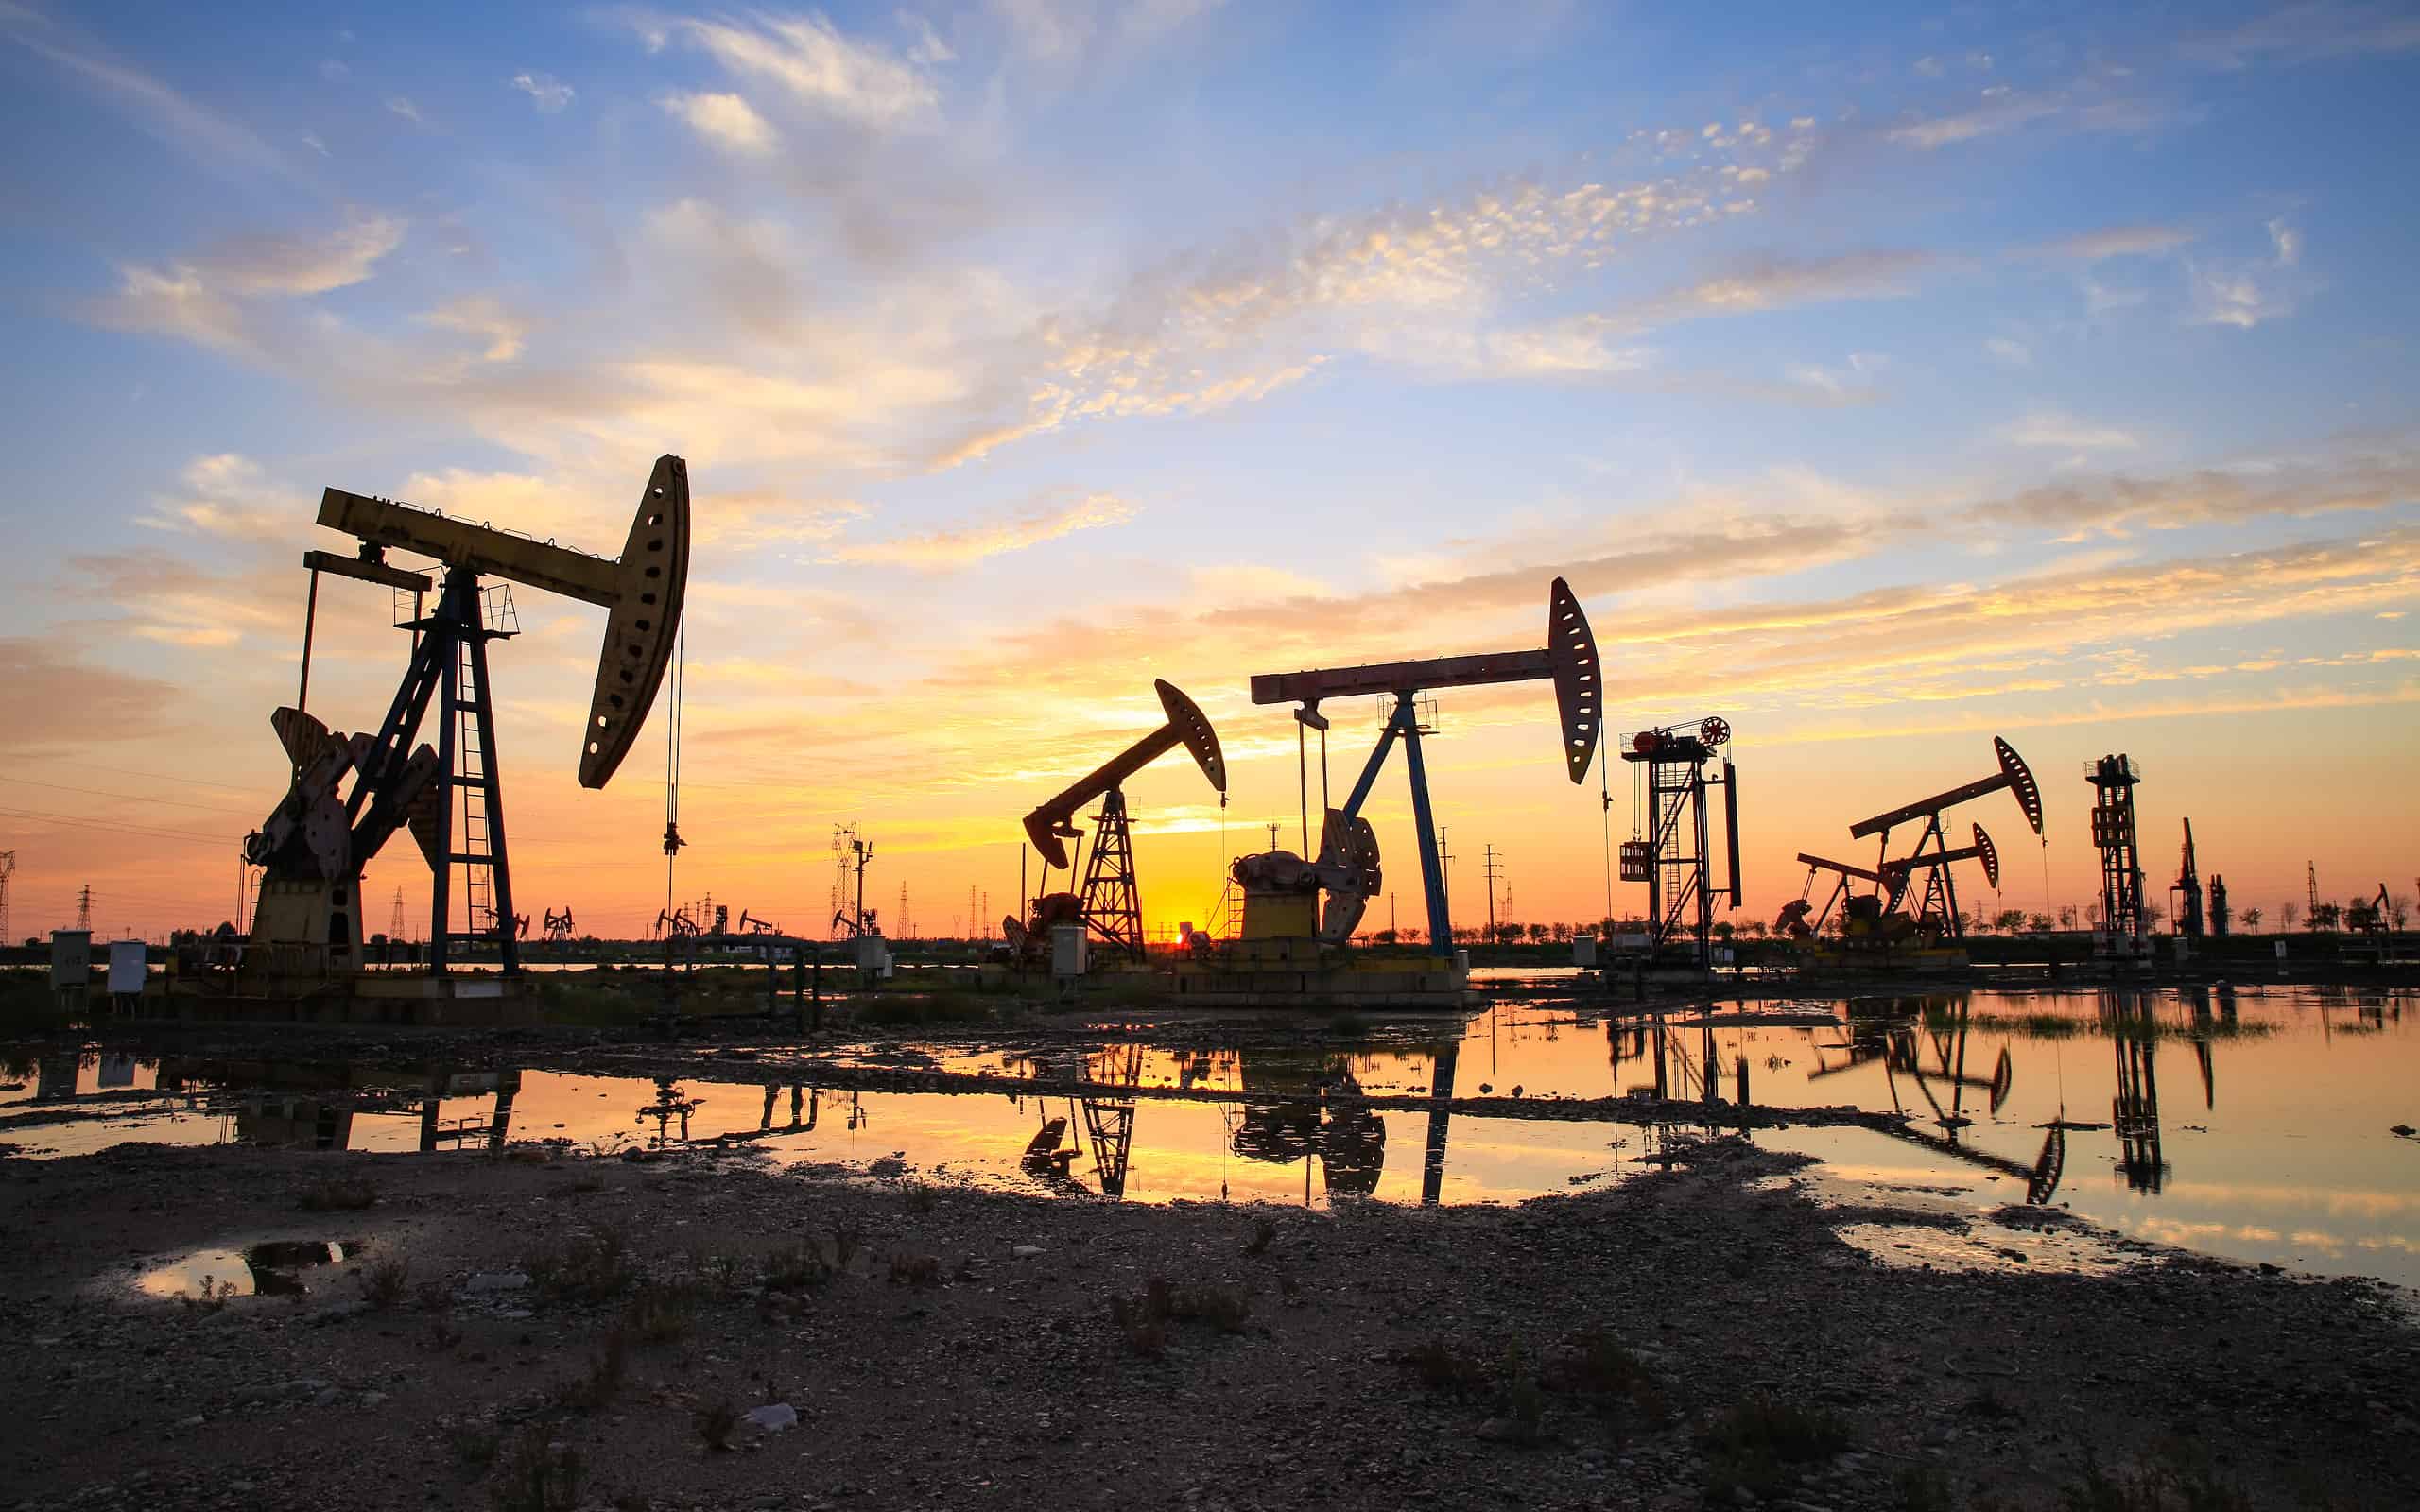 Oil field site, in the evening, oil pumps are running, The oil pump and the beautiful sunset reflected in the water